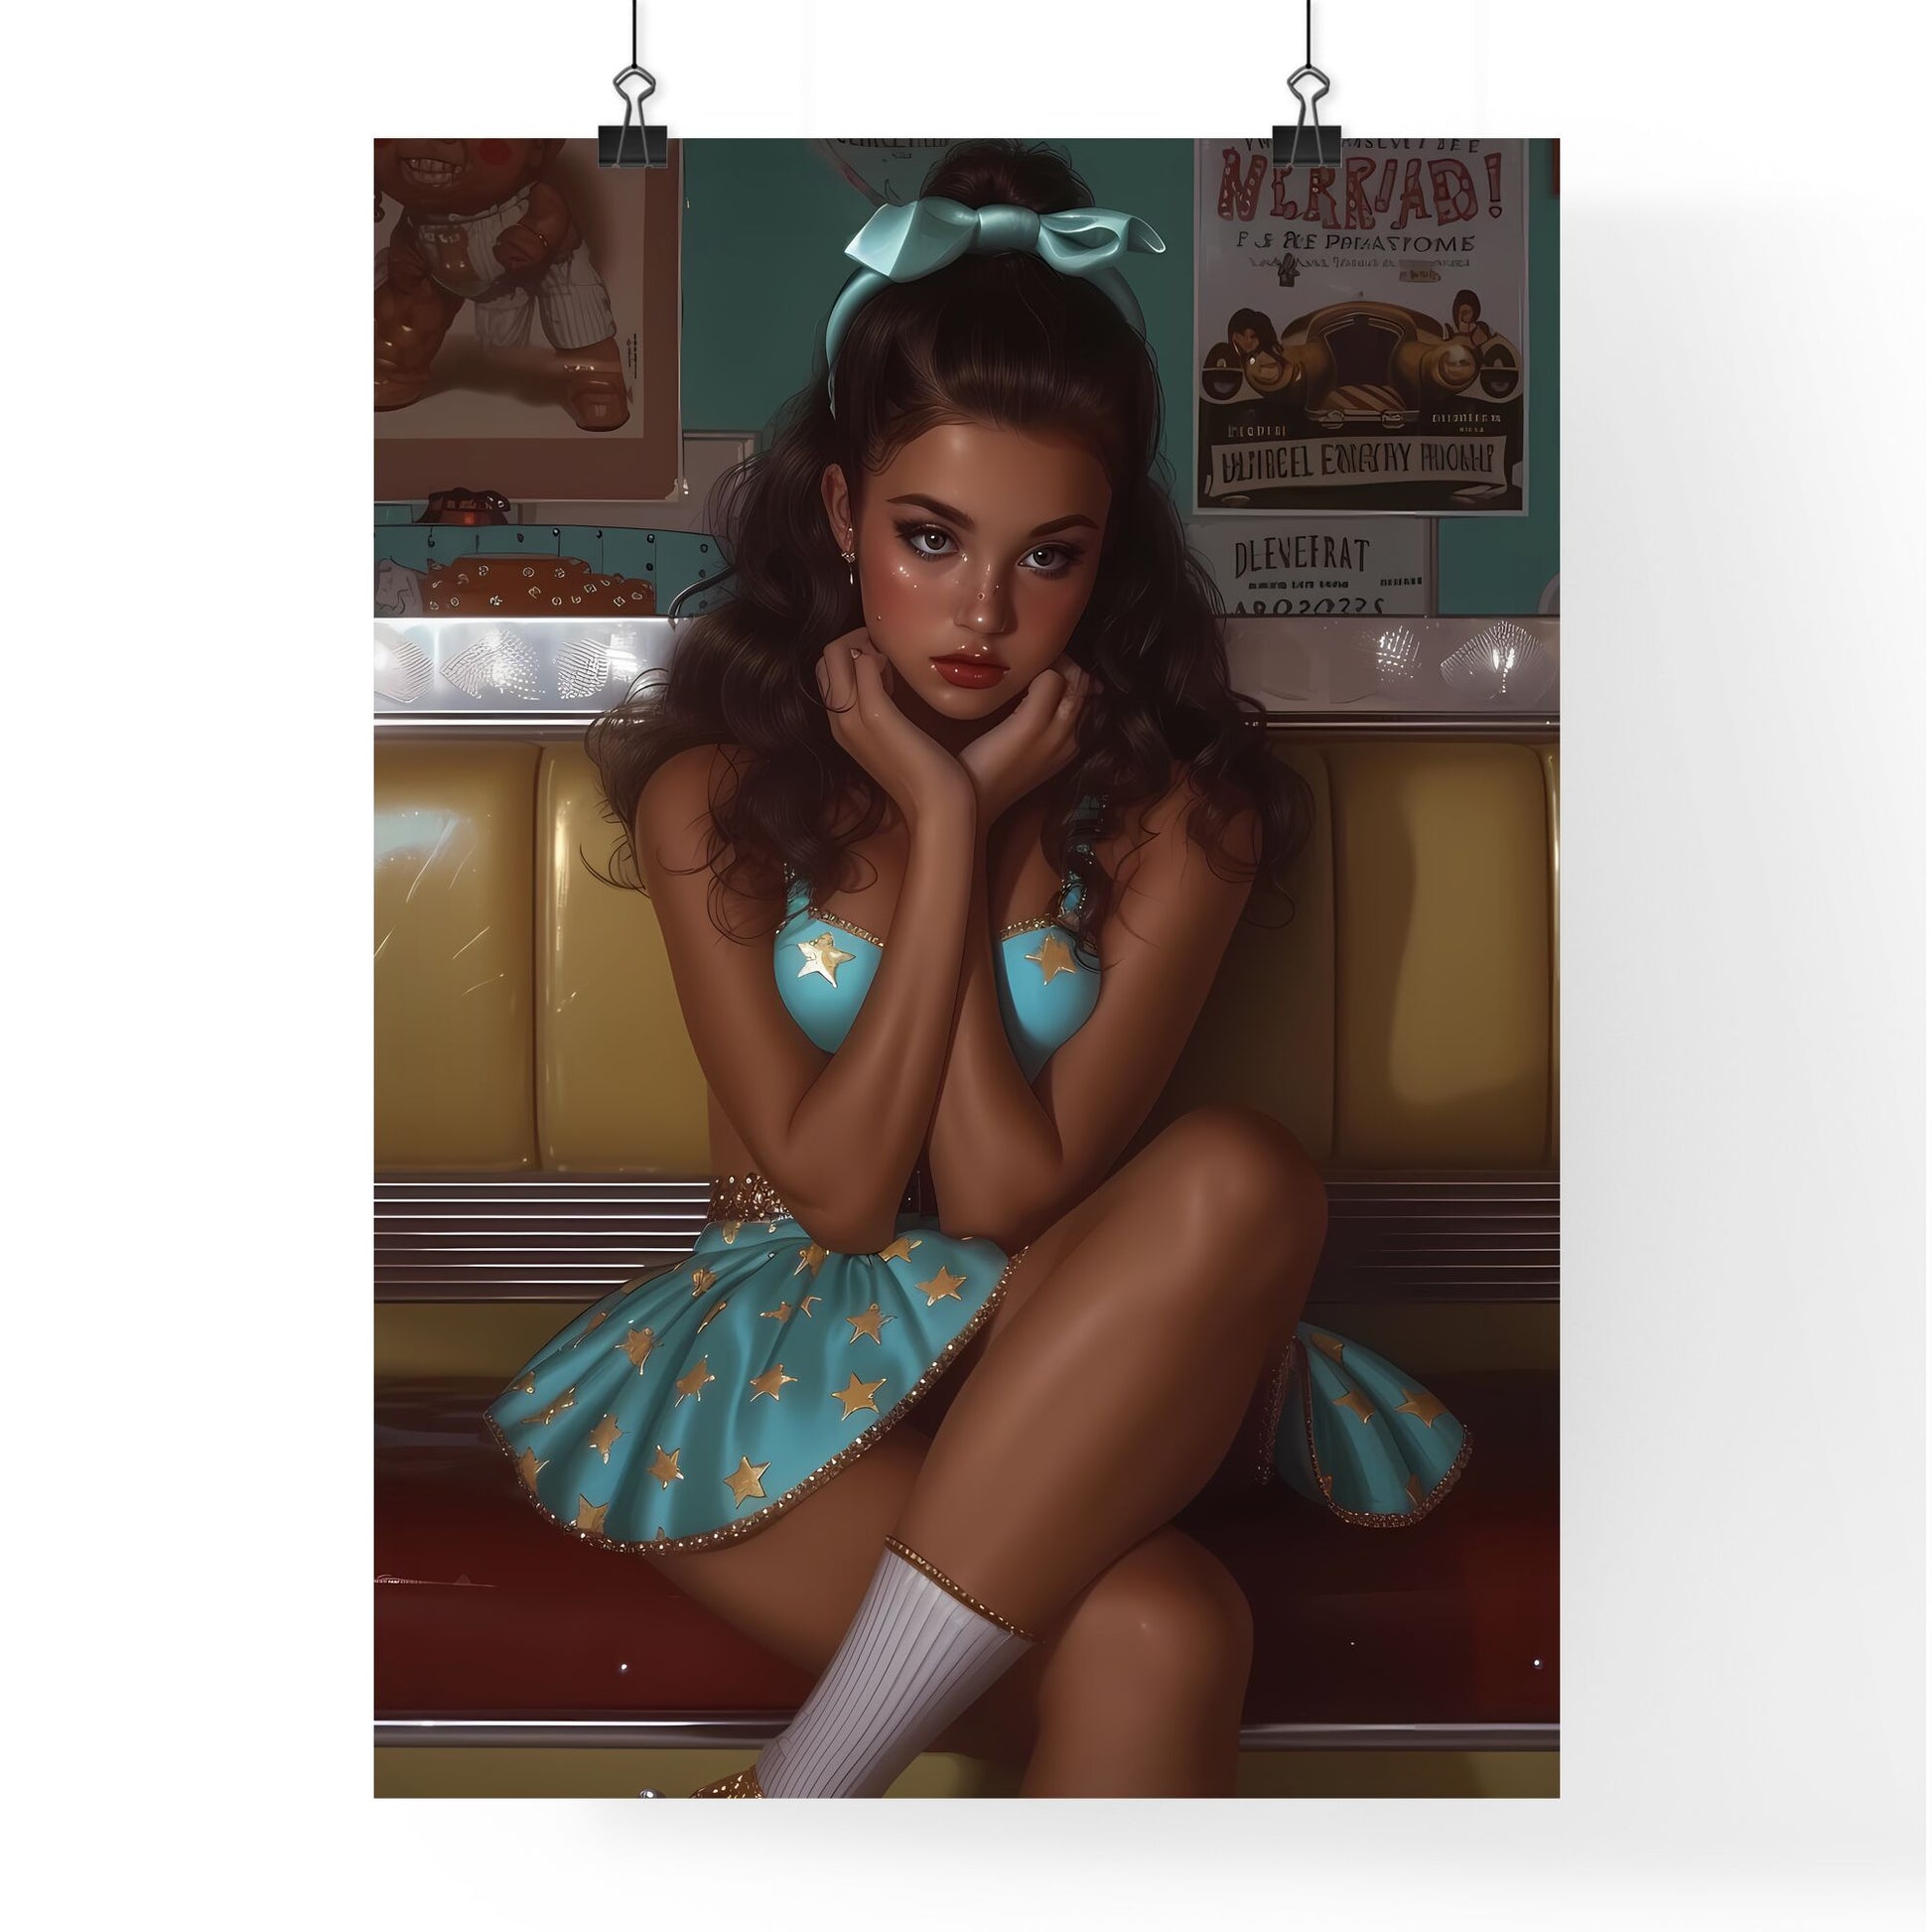 Gogo girl hyper realism style - Art print of a girl sitting on a bench Default Title